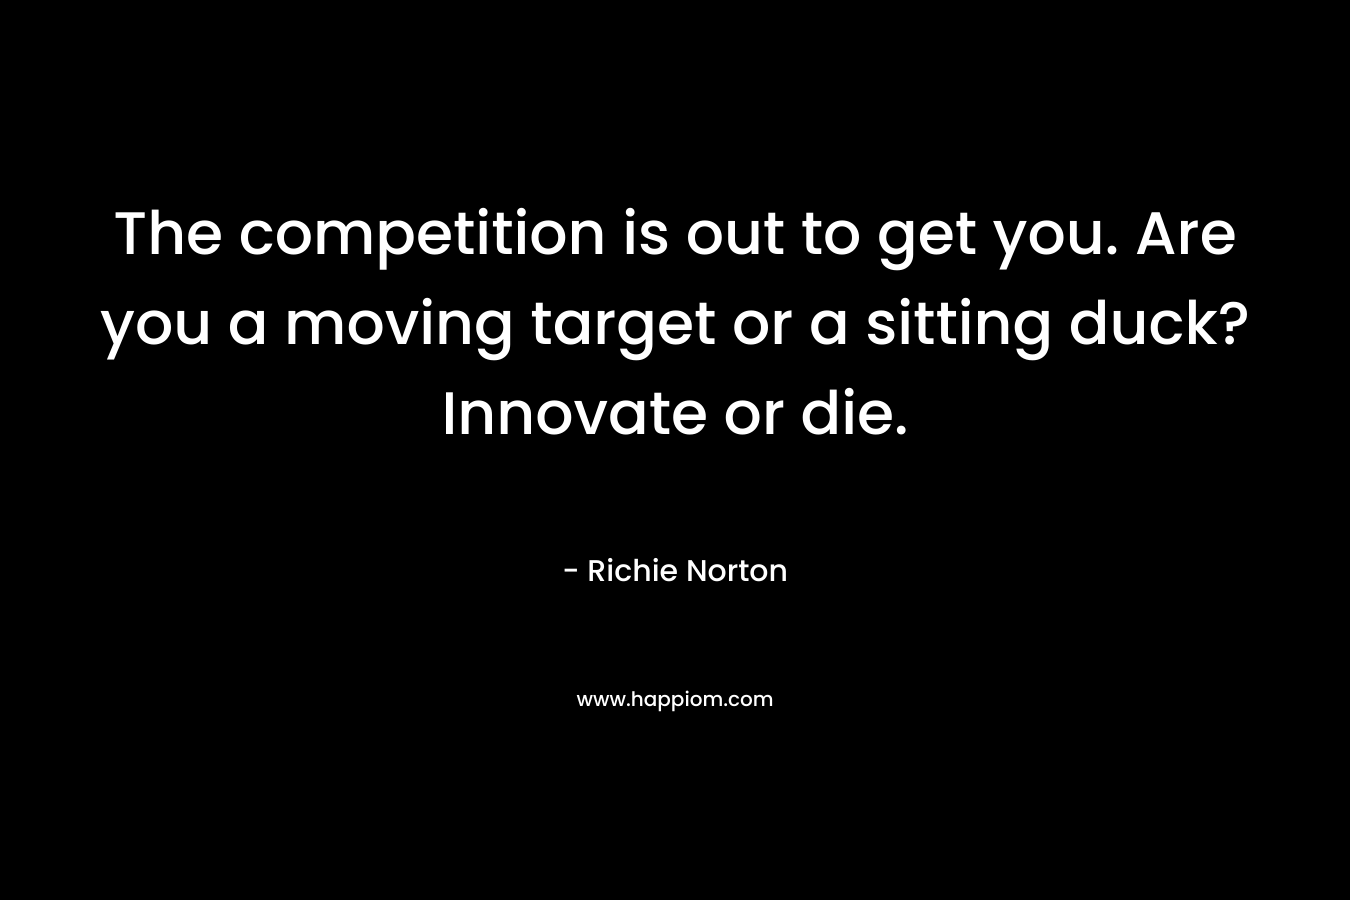 The competition is out to get you. Are you a moving target or a sitting duck? Innovate or die.